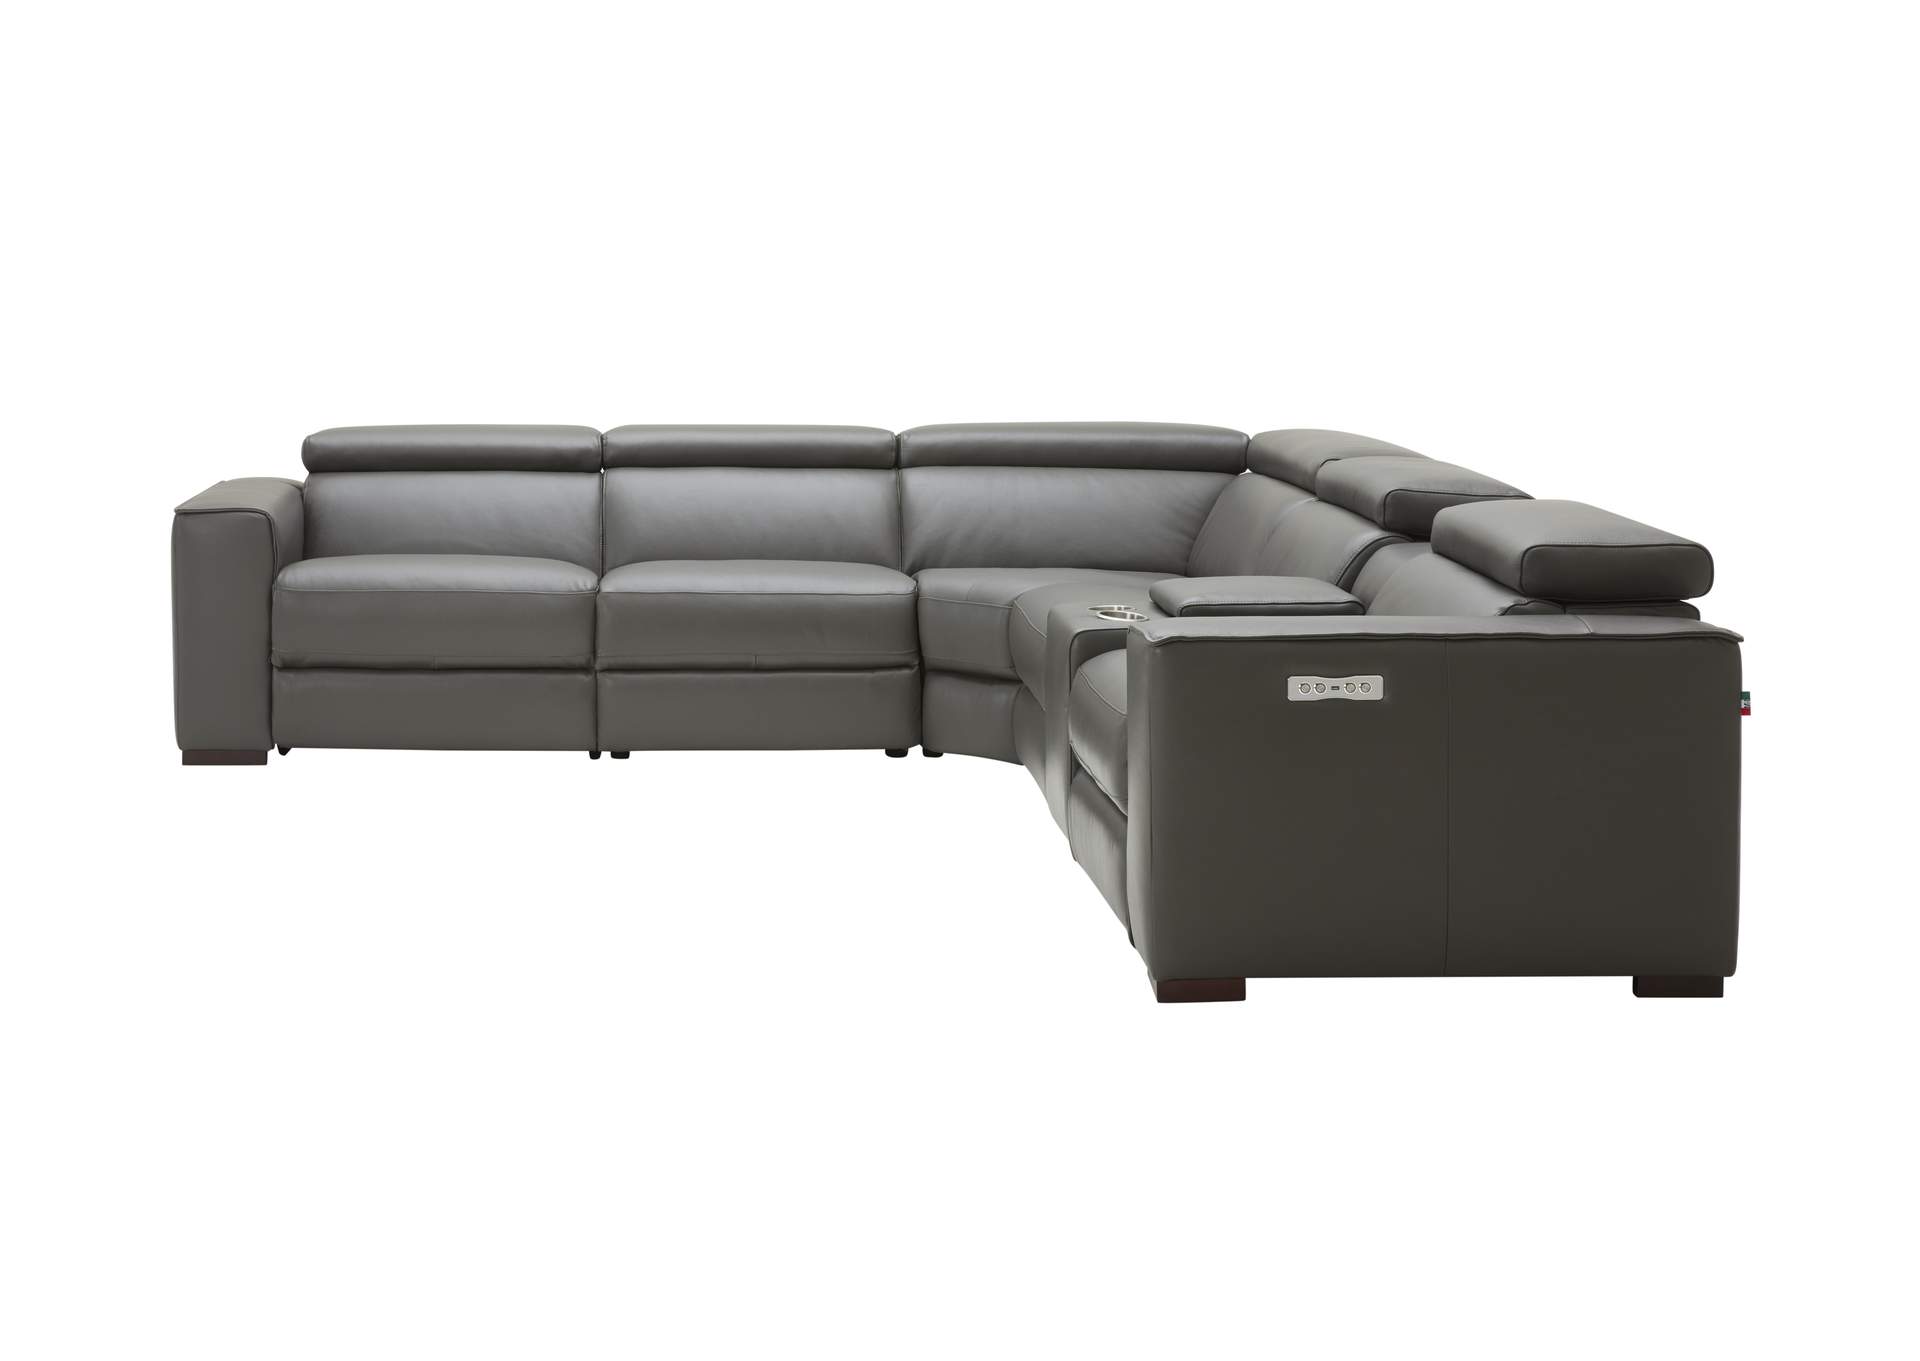 Picasso Motion Sectional In Dark Grey,J&M Furniture